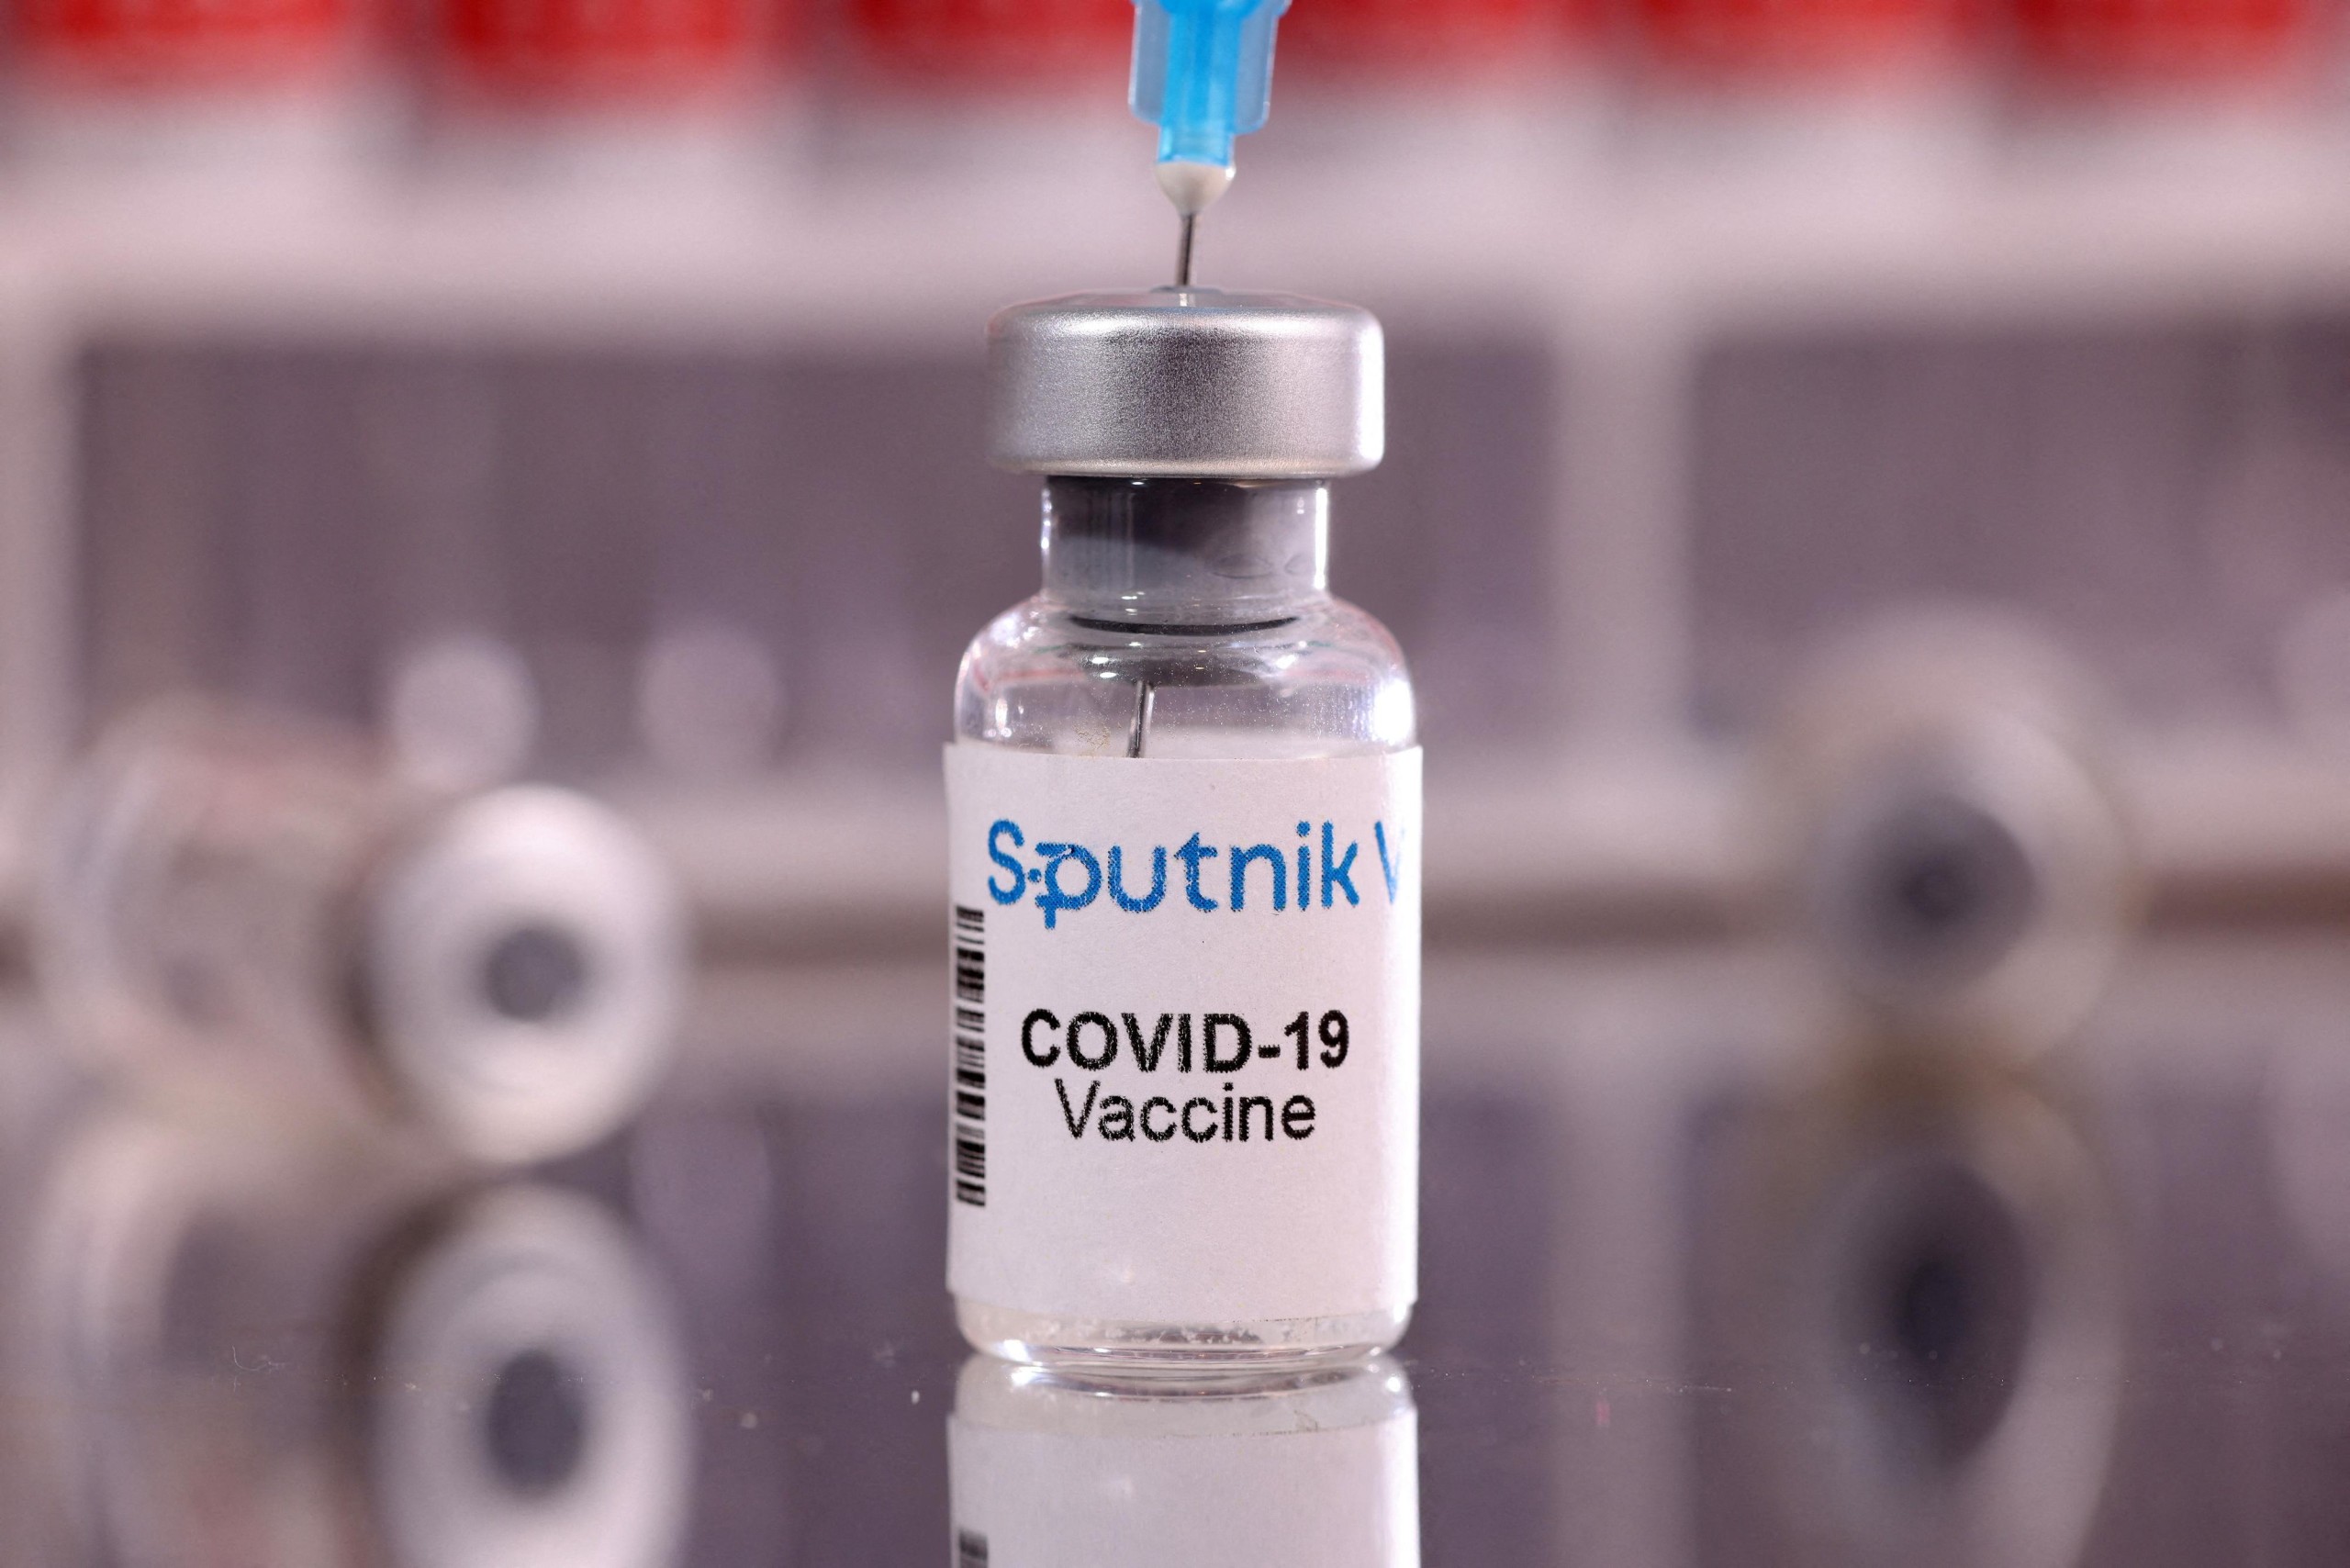 FILE PHOTO: A vial labelled "Sputnik V COVID-19 Vaccine" is seen in this illustration taken January 16, 2022. REUTERS/Dado Ruvic/Illustration/File Photo Photo: DADO RUVIC/REUTERS